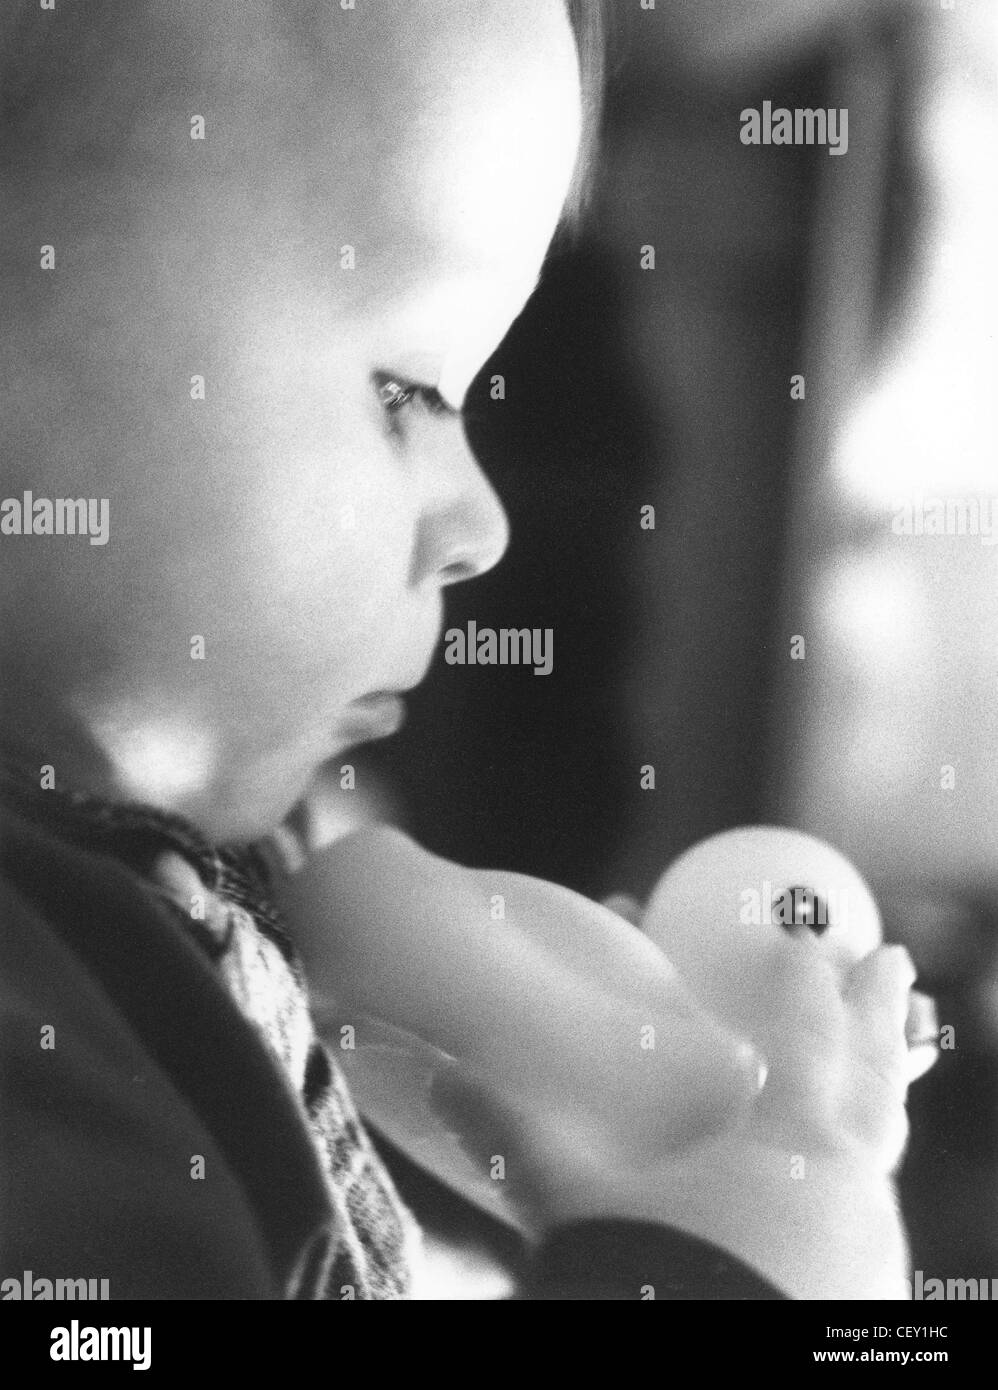 'FACES OF ALFI' Profile of baby playing with toy rubber duck serious expression Stock Photo